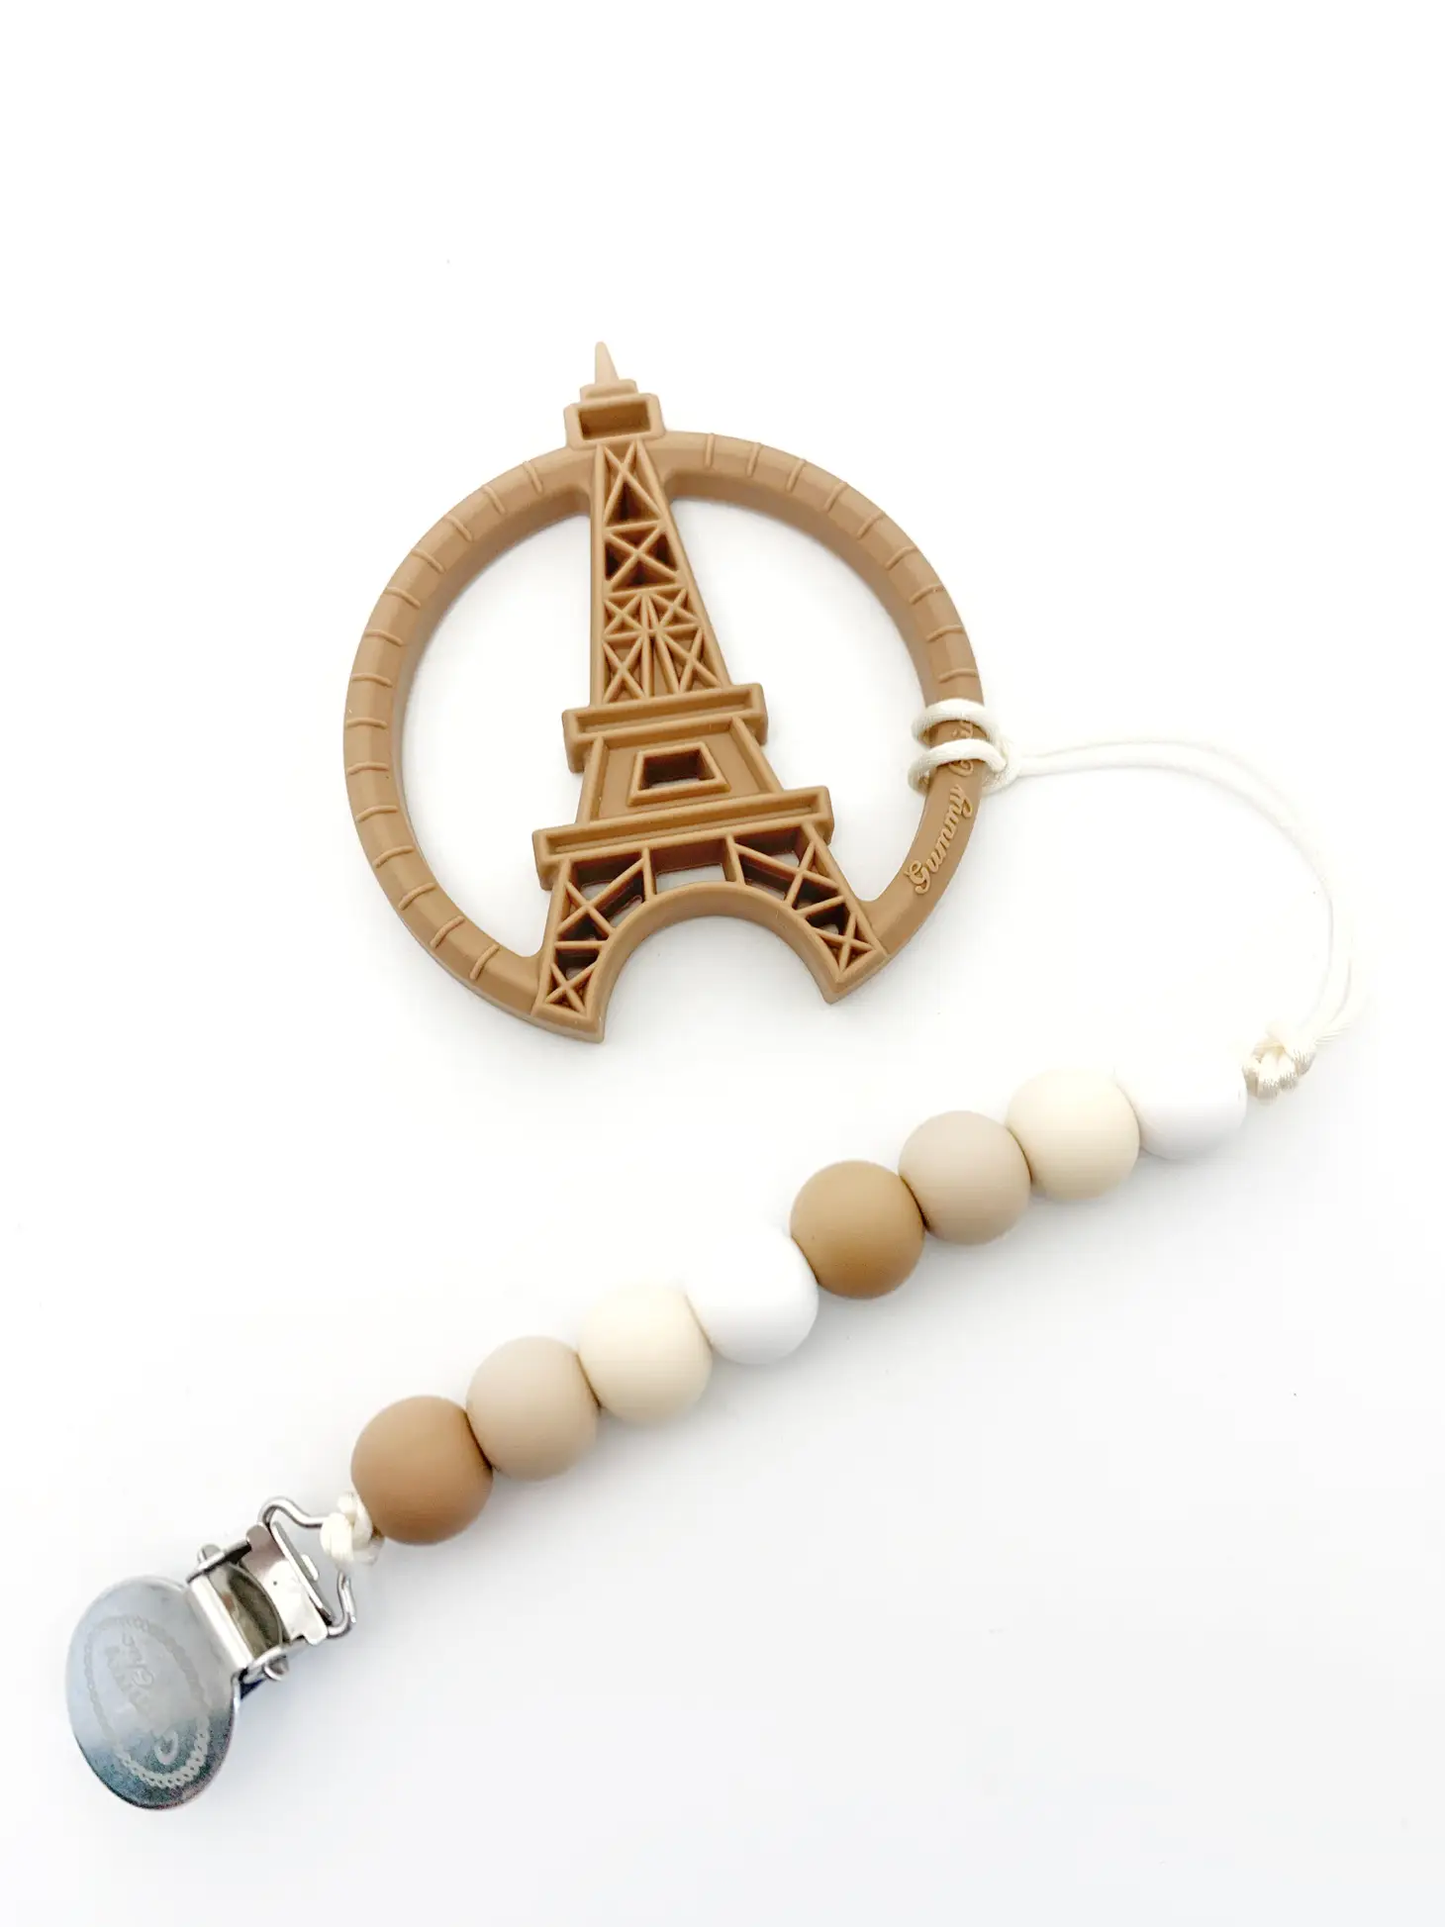 Paris tower with Colored clip